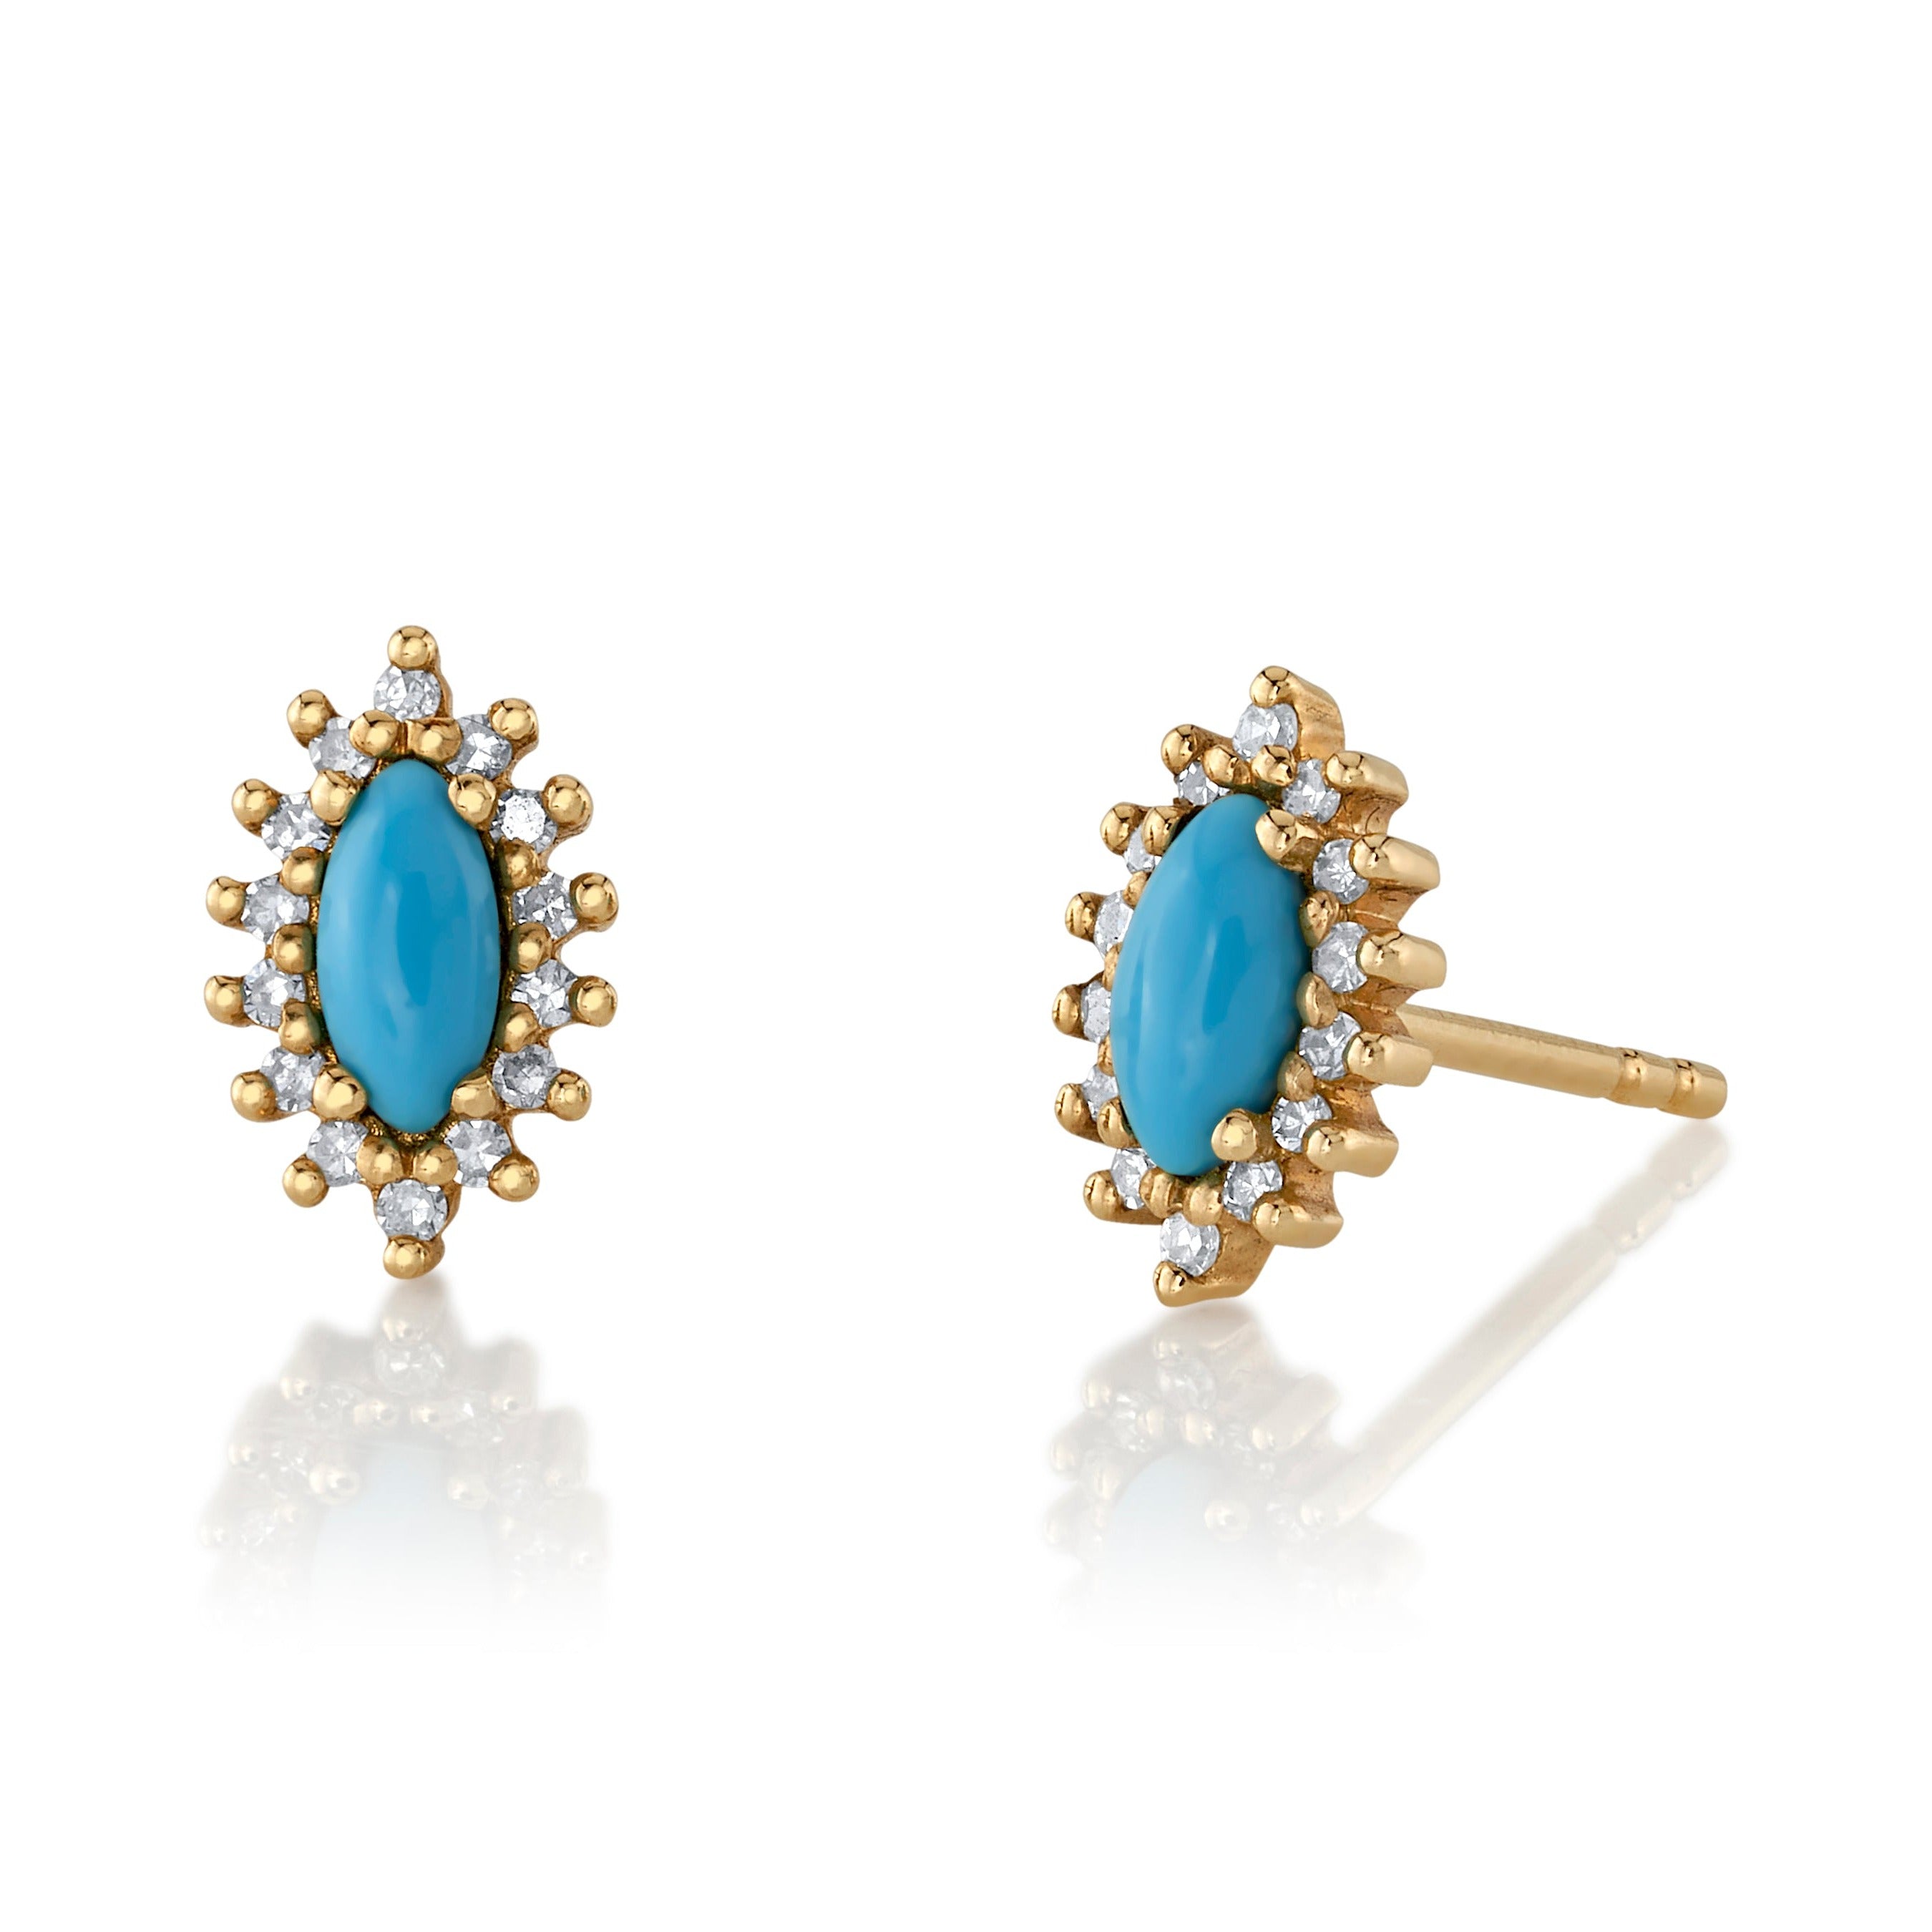 David Yurman Elements Button Earrings in 18k Yellow Gold with Turquoise and  Pave Diamonds | Lee Michaels Fine Jewelry stores